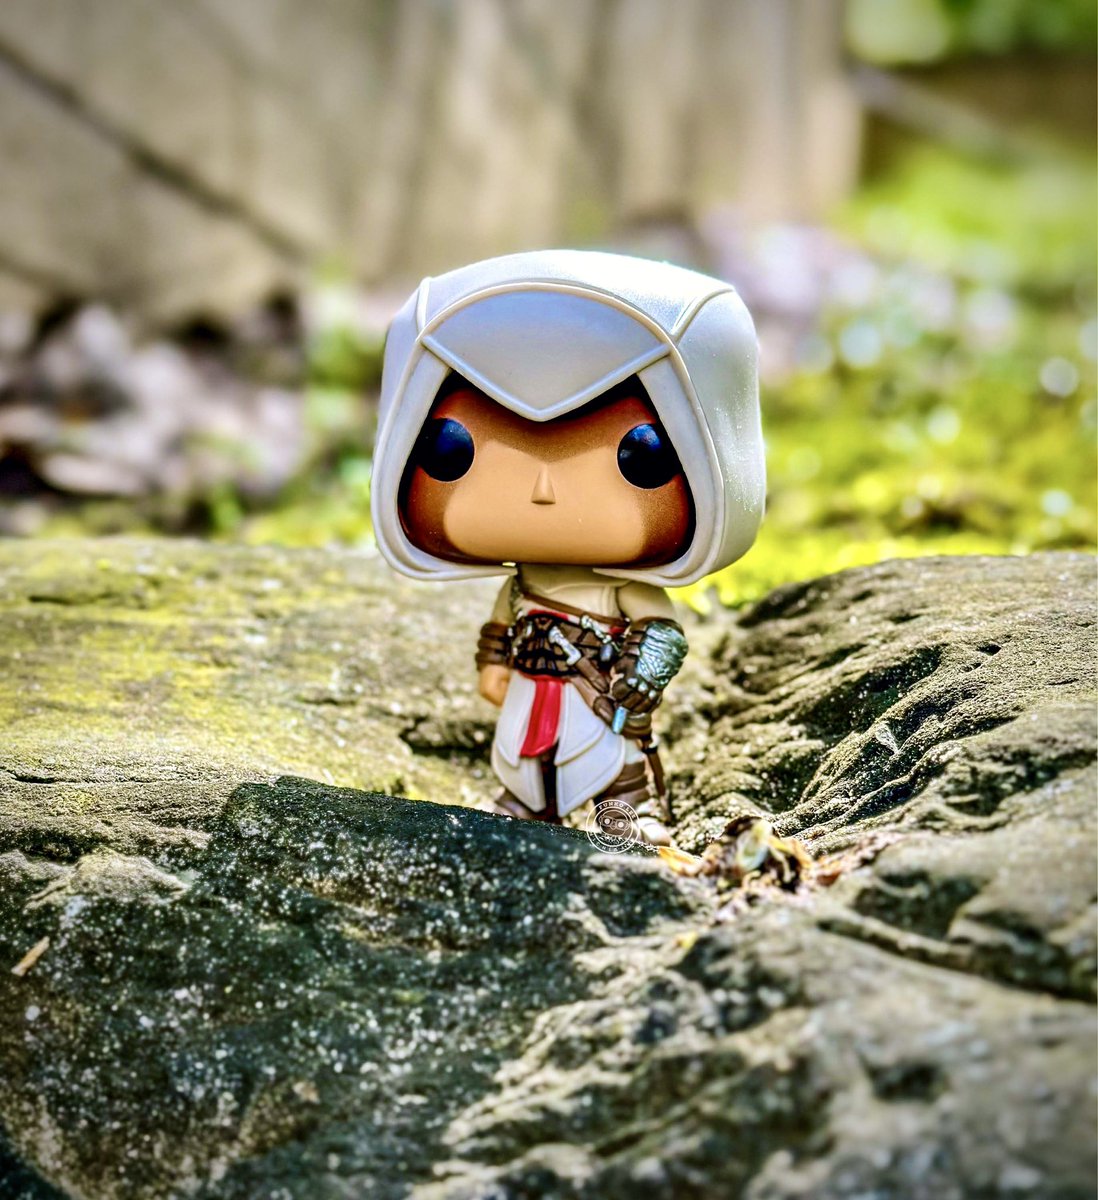 “We place faith in ourselves. We see the world the way it really is. And hope that all mankind would see the same.” ~Altair; who enjoys the #AssassinCreed games? 🎮🗡️👑 #fun #videogame #Funko #FunkoFunatic #FOTM #FunkoFamily @originalfunko